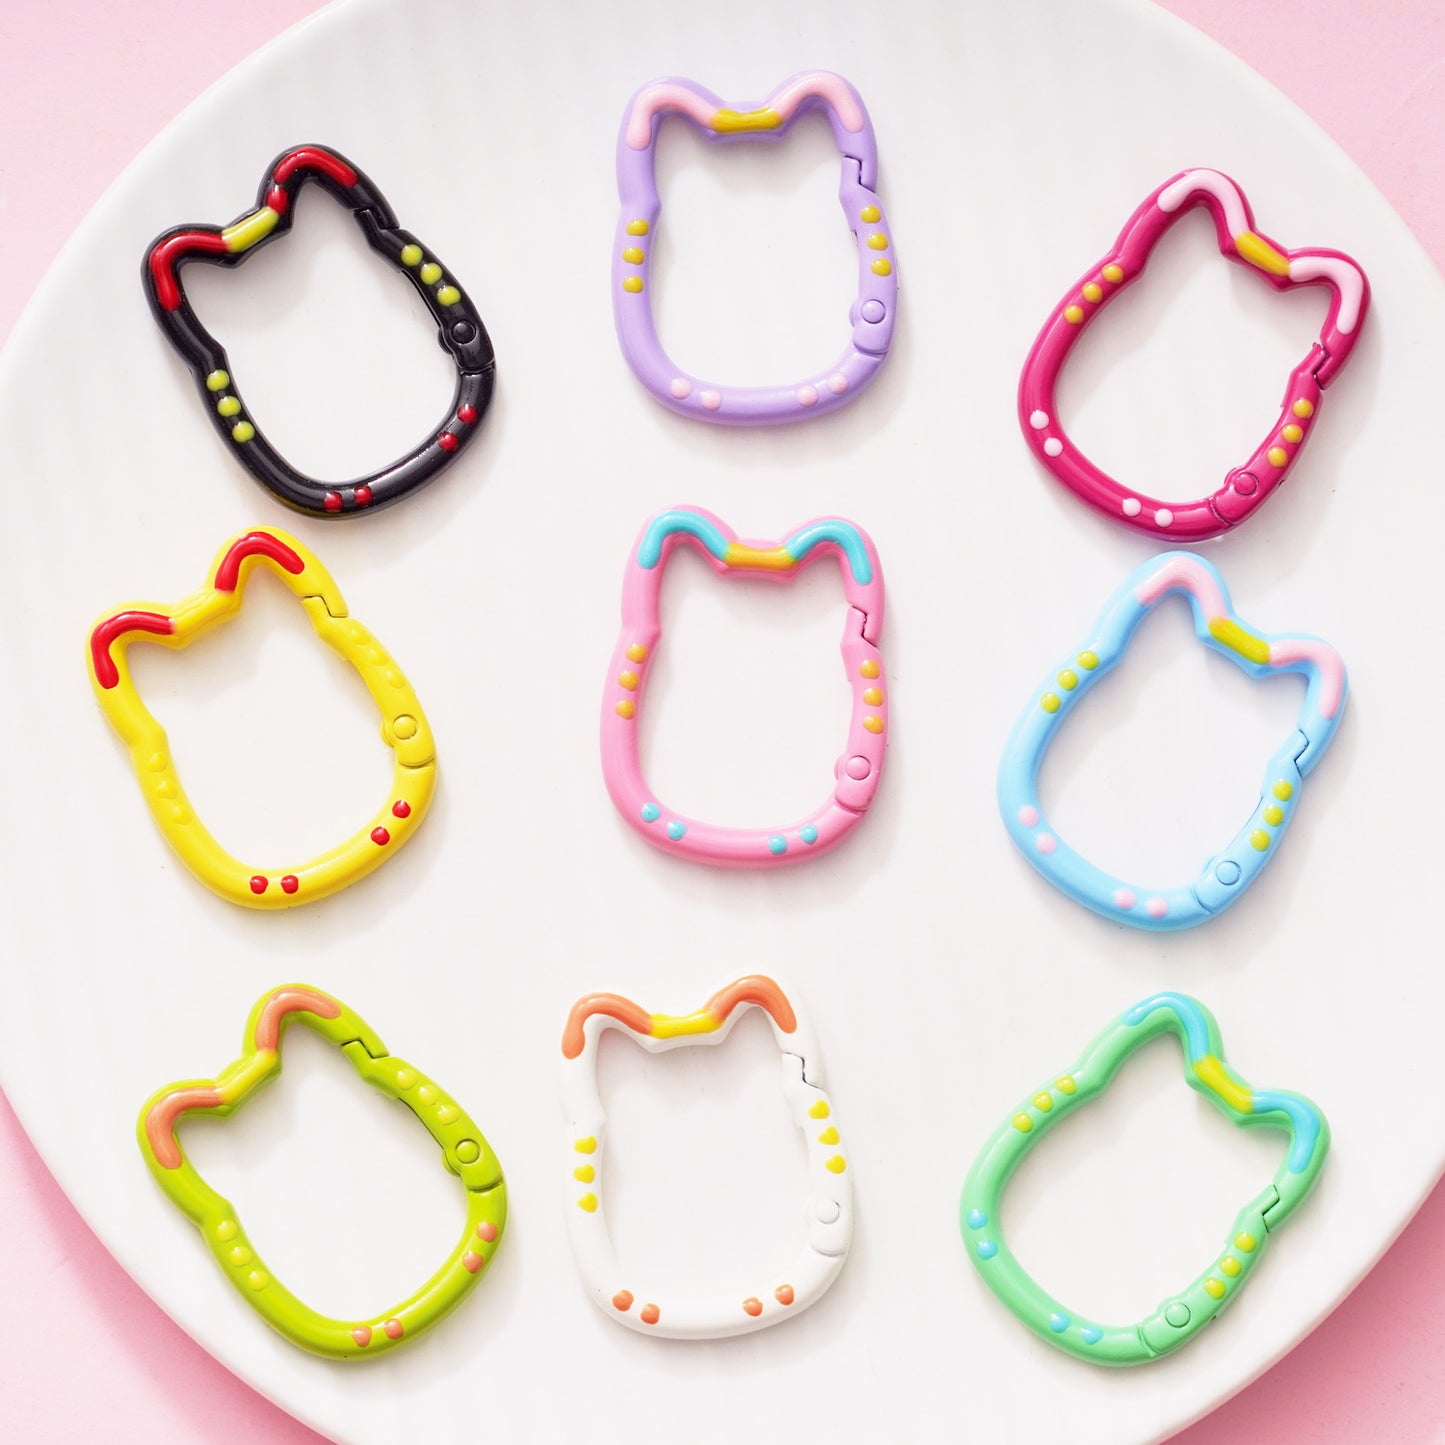 20 Pieces Cute Cat Shape Ring Buckle for DIY Keychain Phone Chain